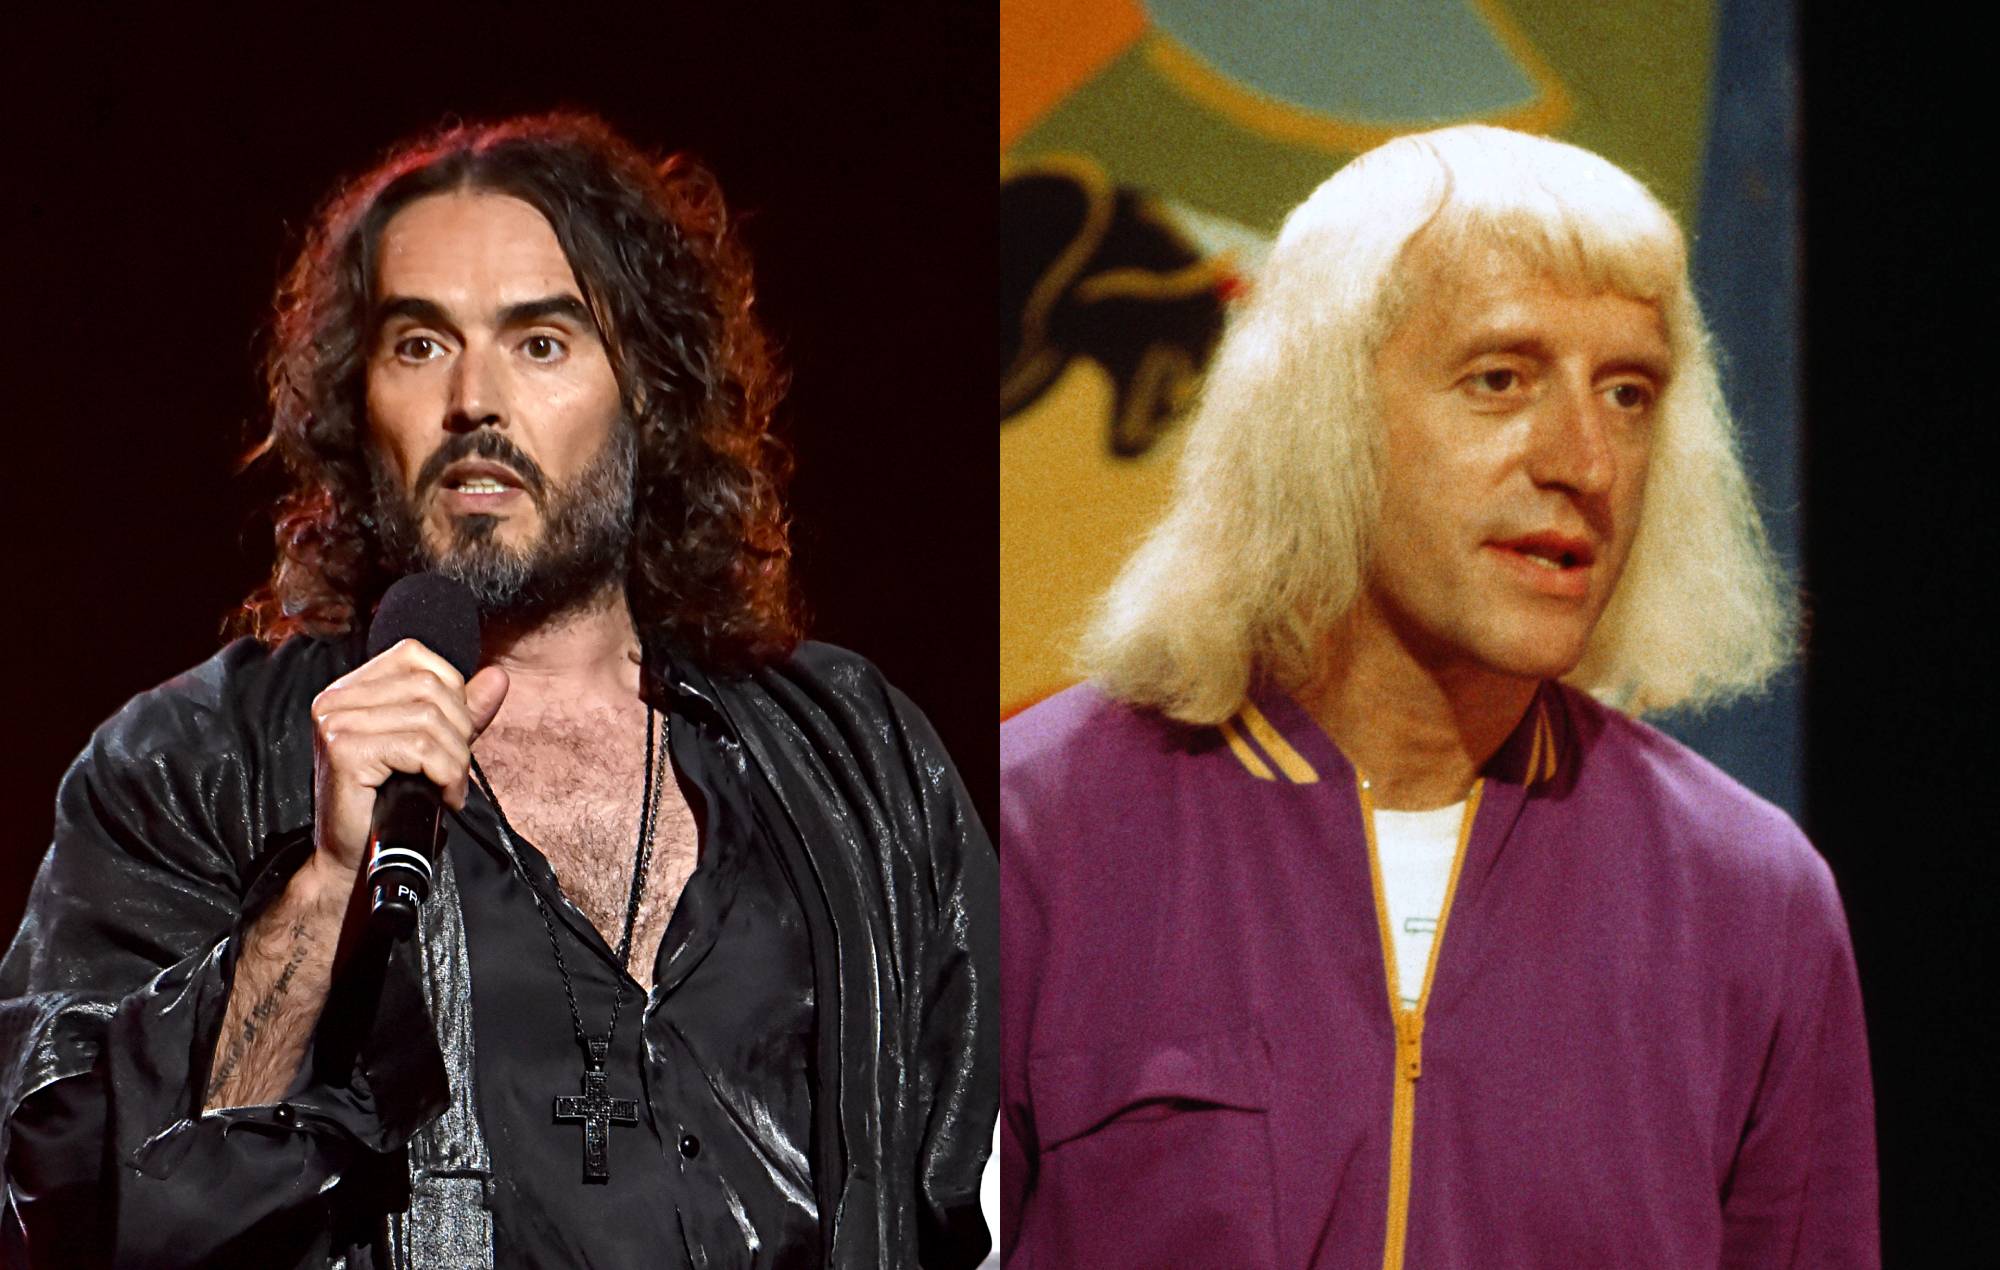 Russell Brand and Jimmy Saville